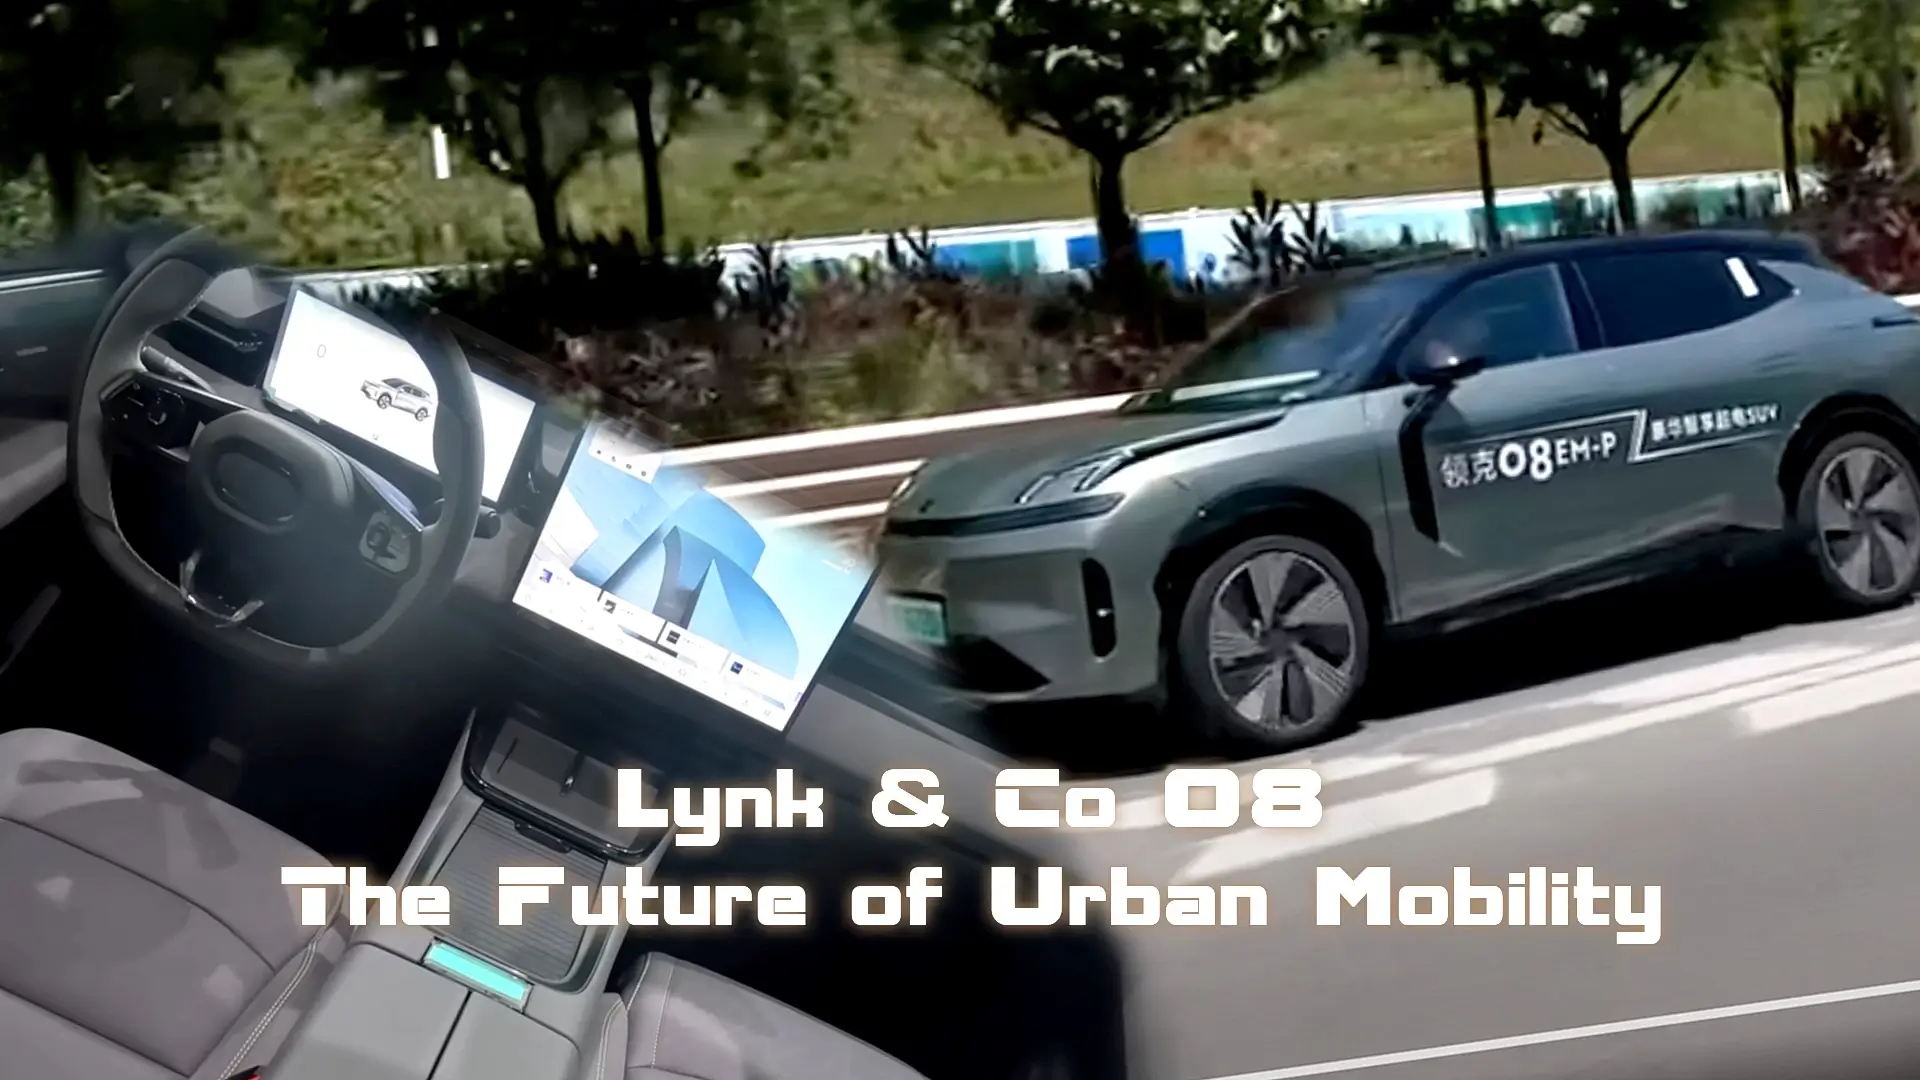 Read more about the article Lynk & Co 08 Price: The Future of Urban Mobility